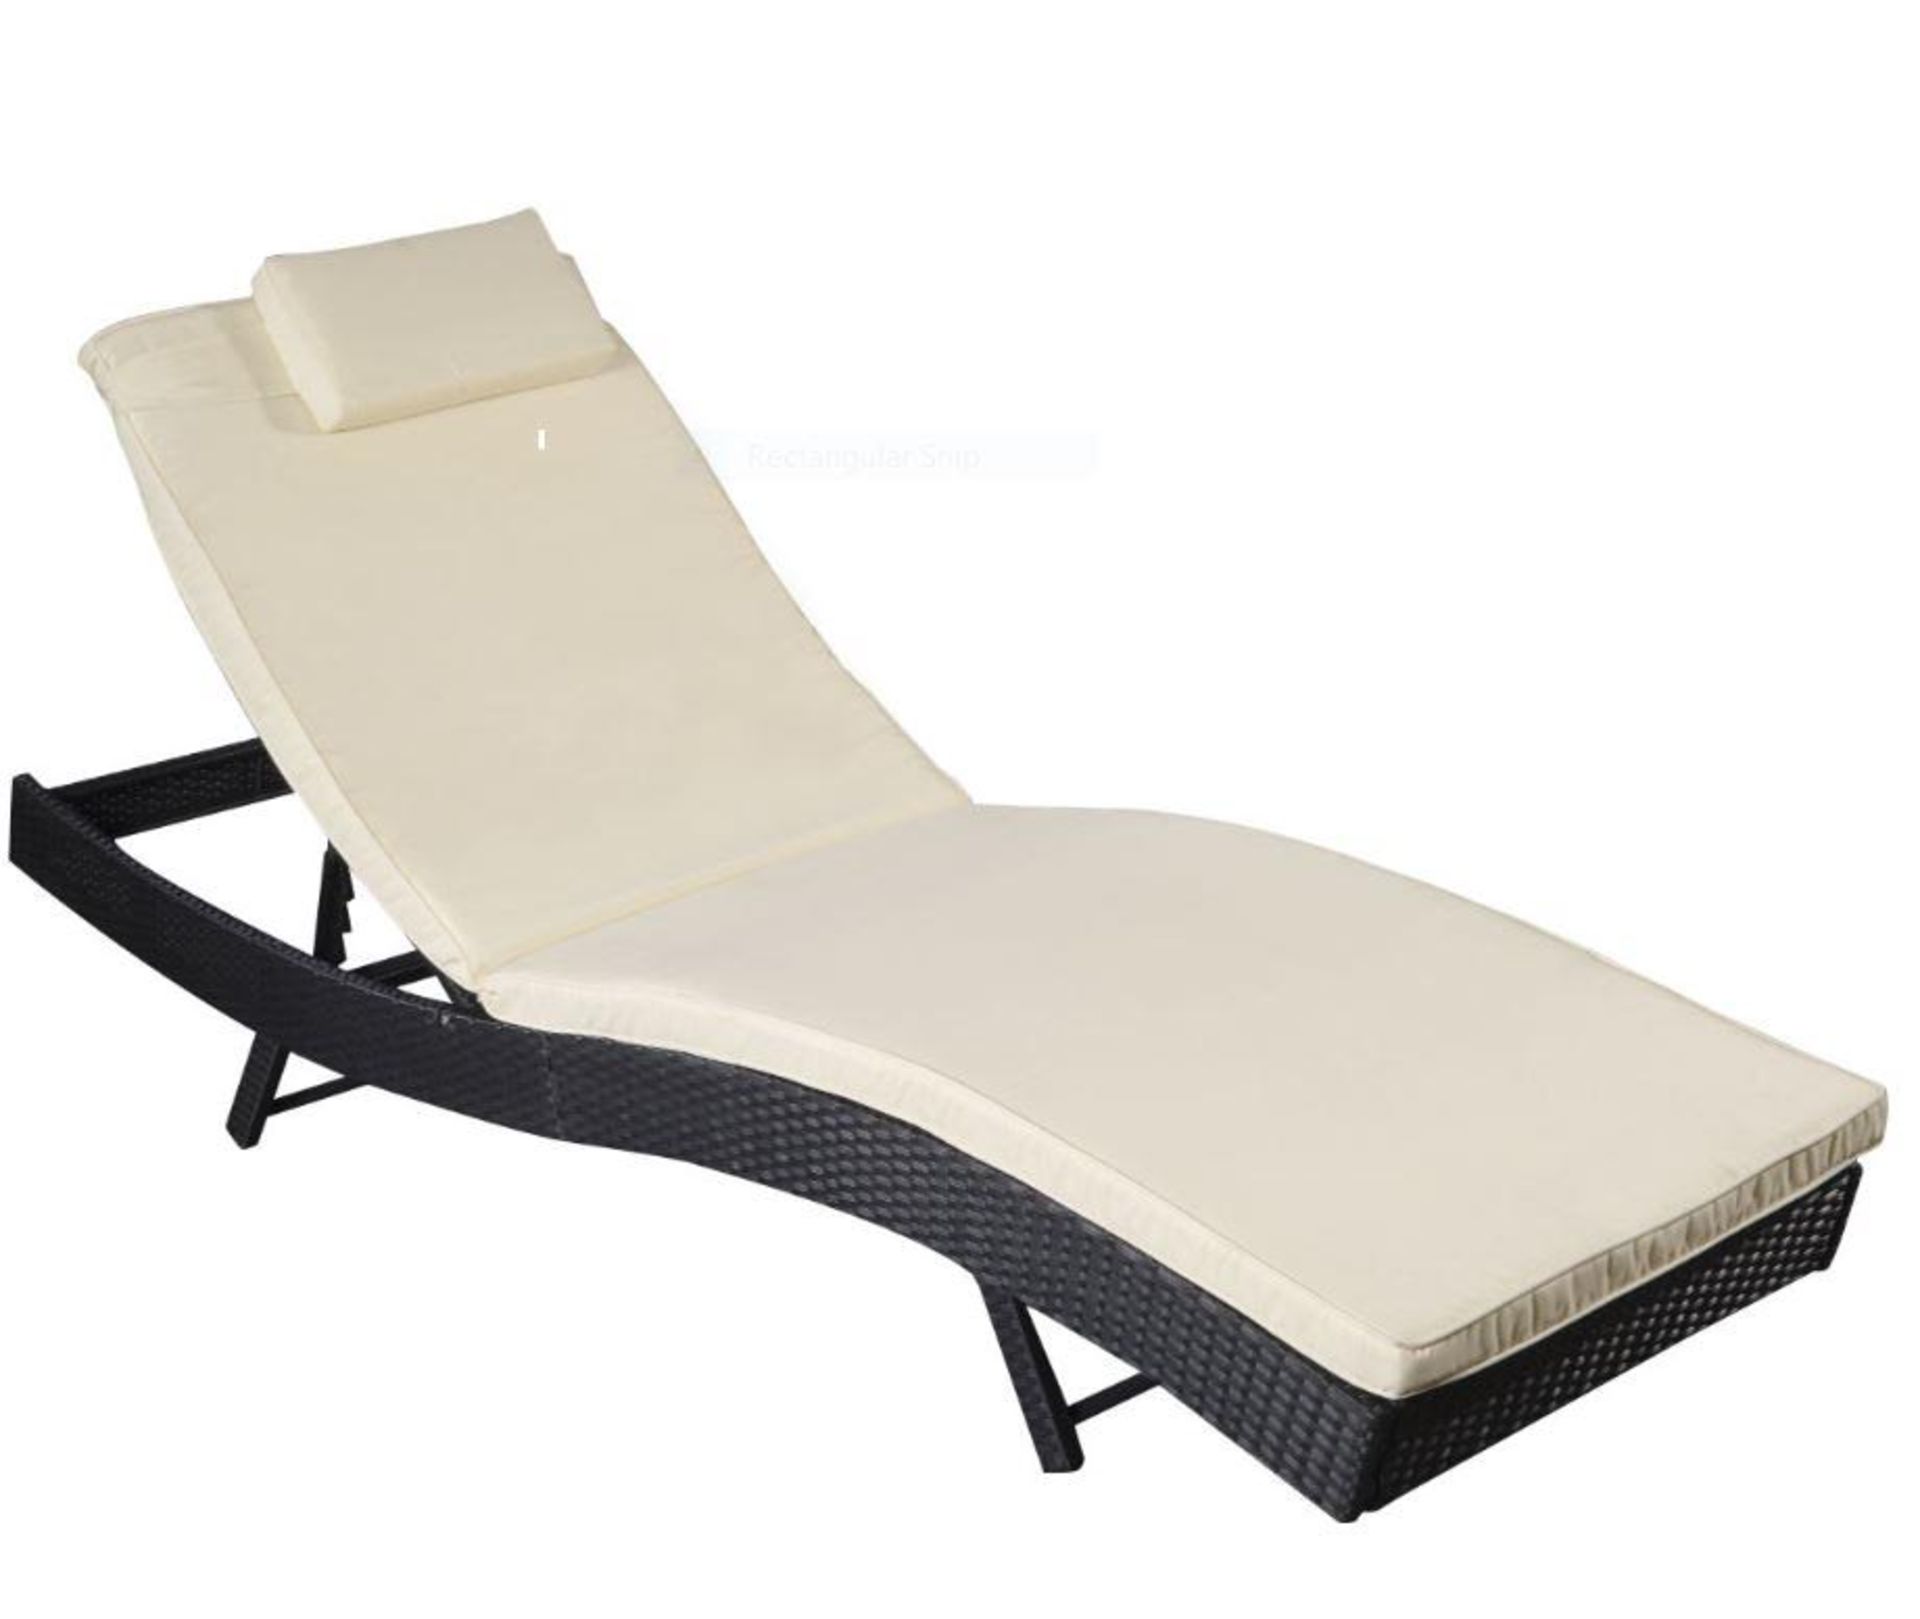 Brand New & Boxed Moritz Rattan Sun lounger. Enjoy a spot of sunbathing on a bright afternoon with